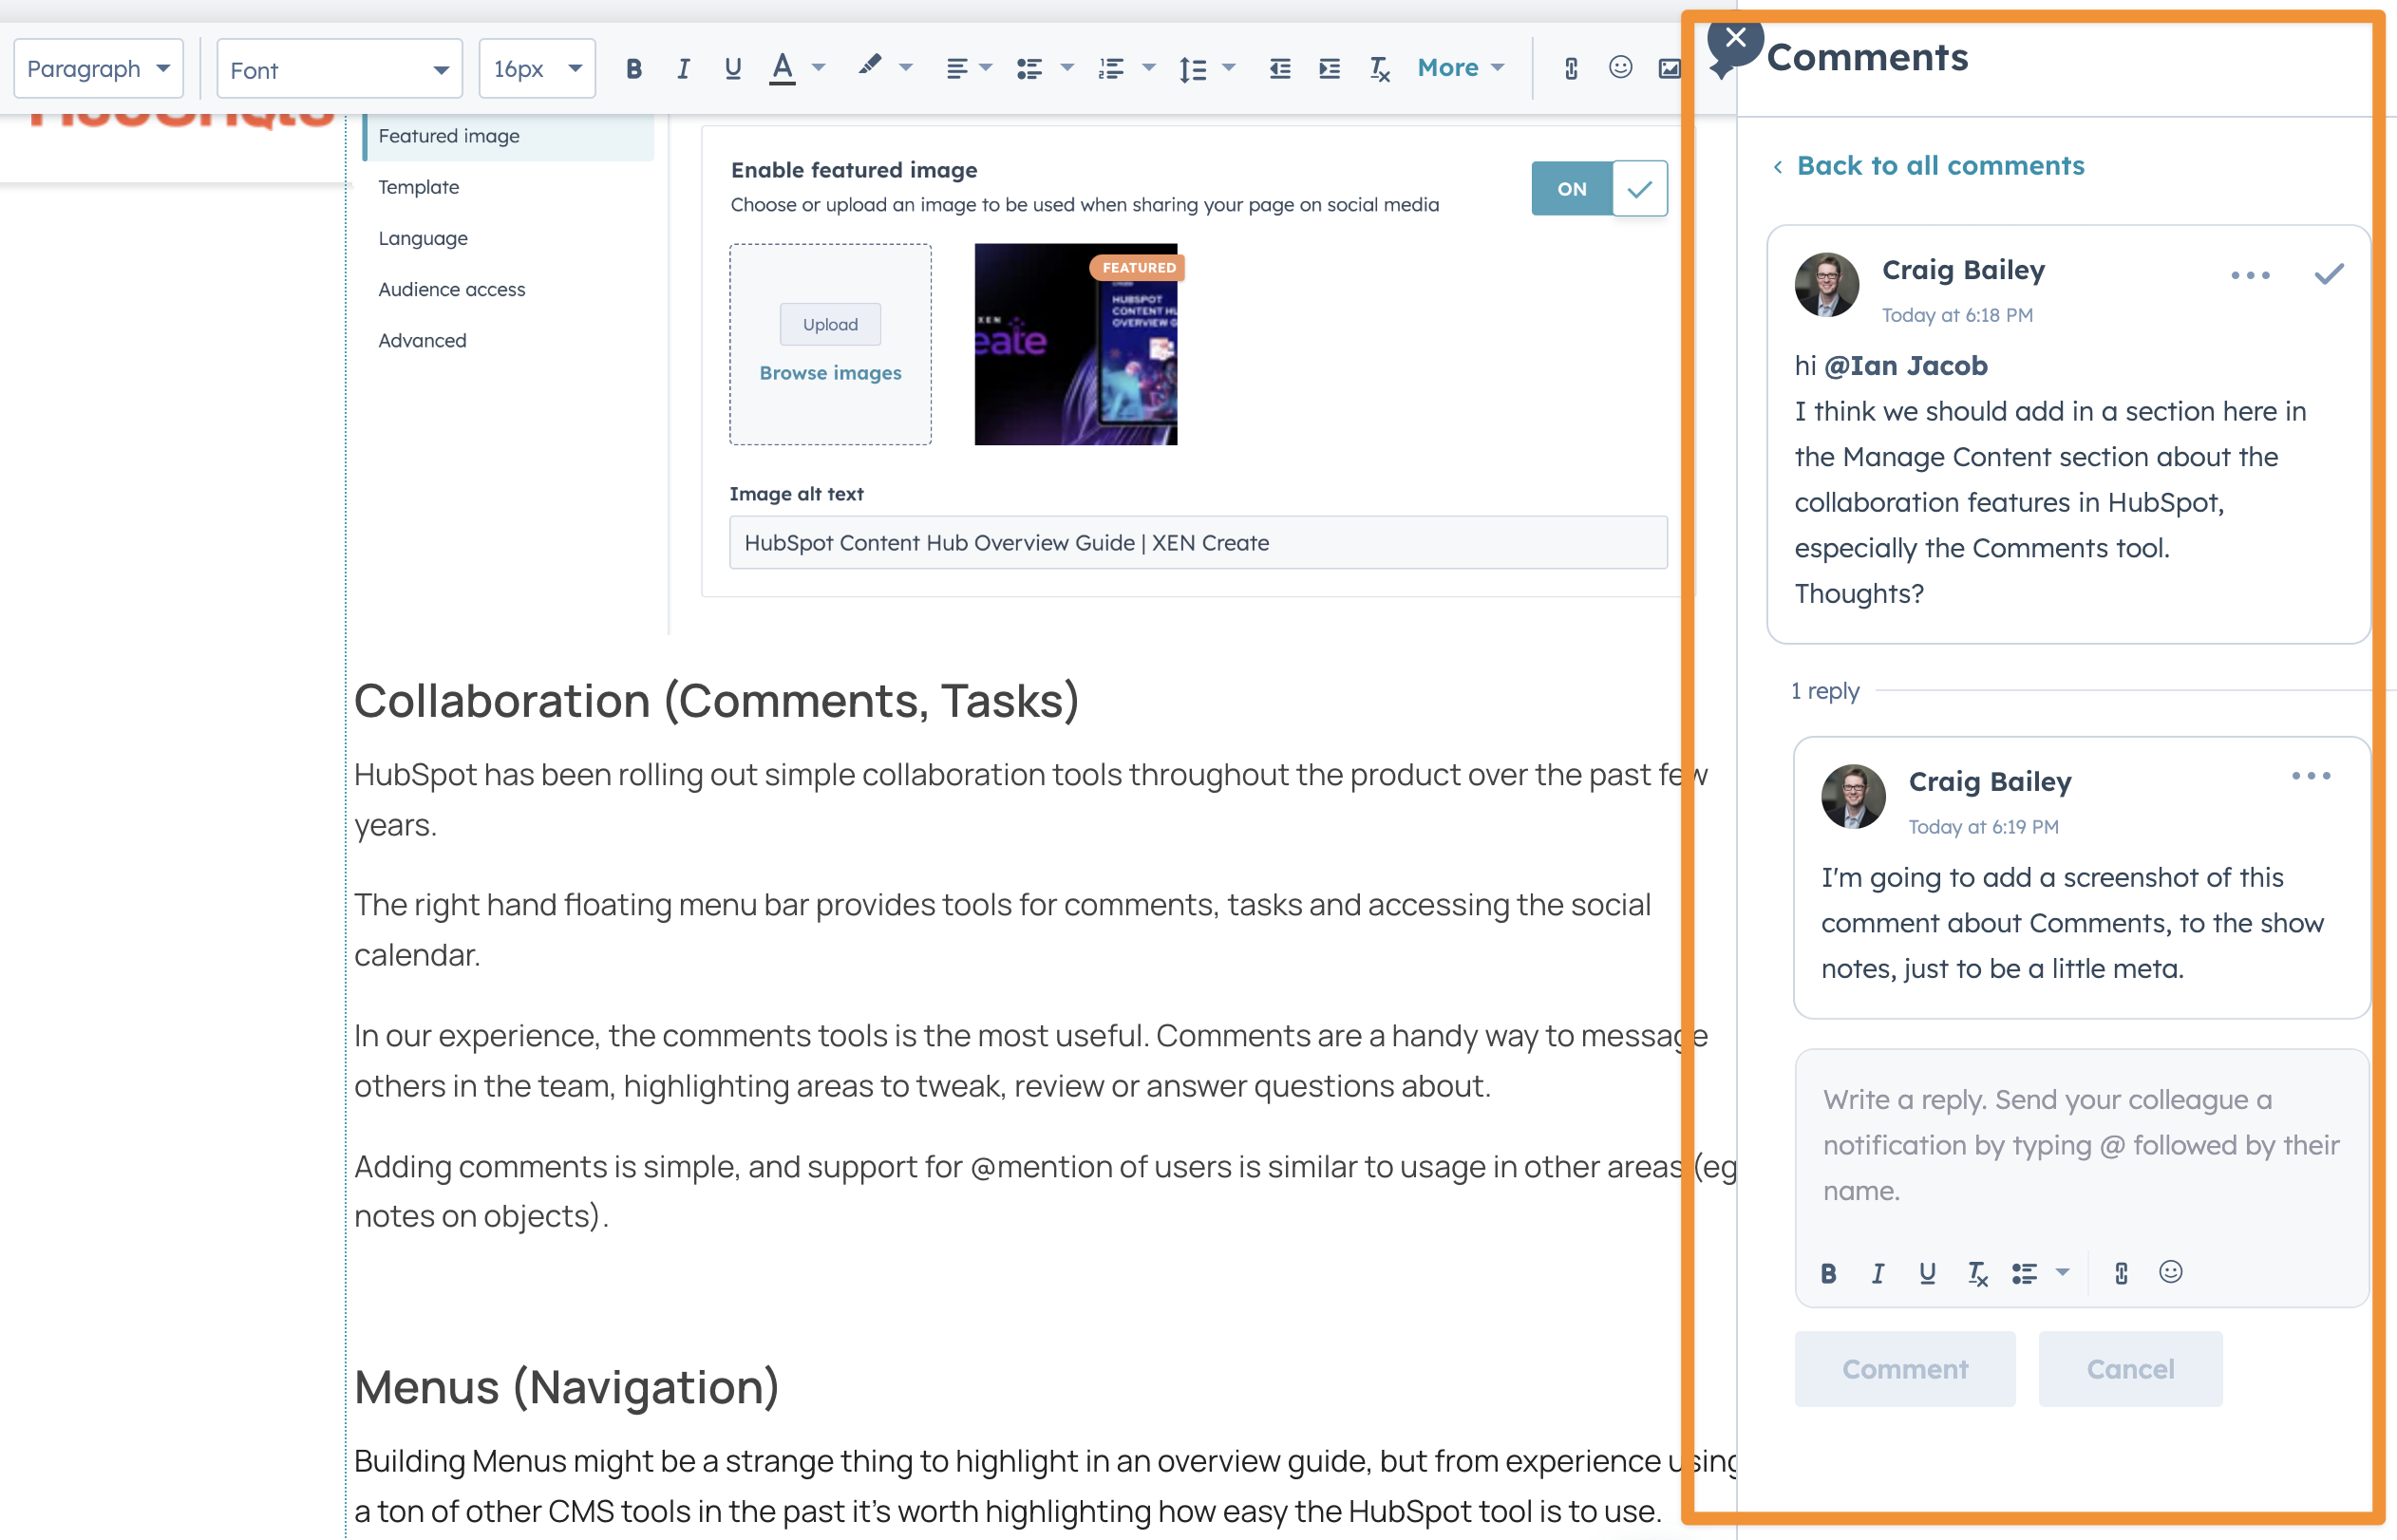 Using the Comment tool in HubSpot